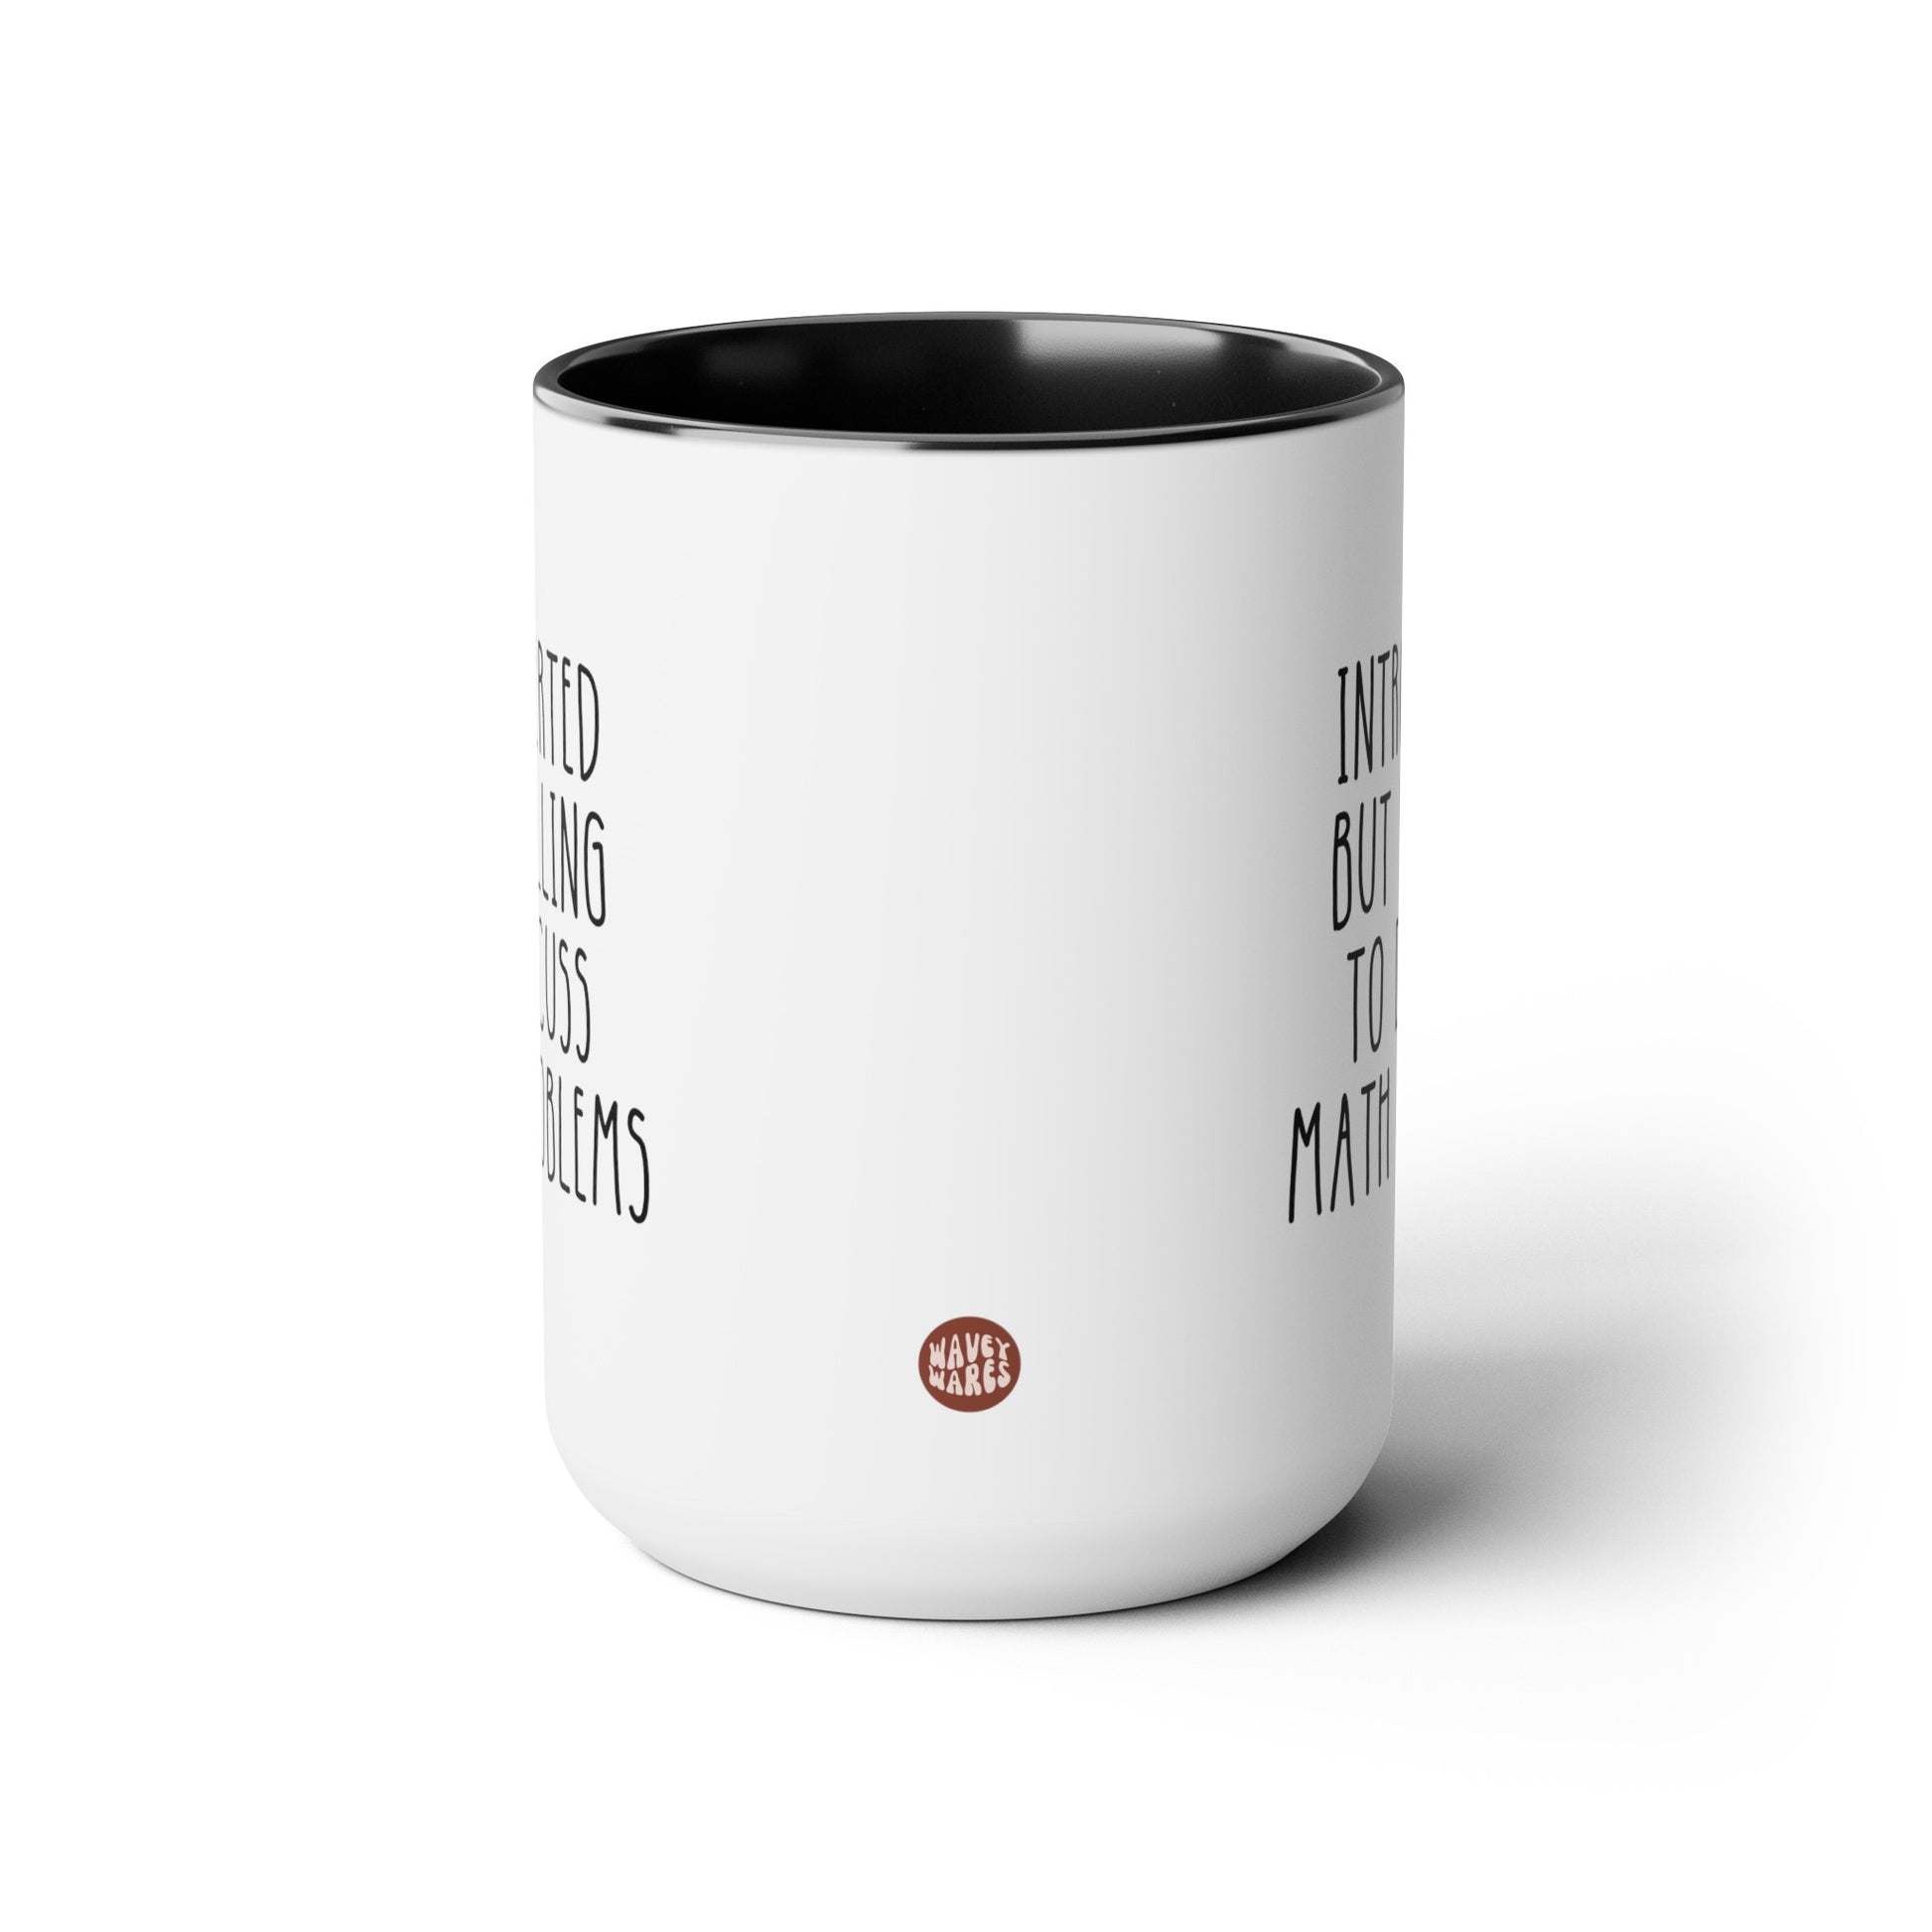 Introverted But Willing To Discuss Math Problems 15oz white with black accent funny large coffee mug gift for introvert mathematics geek accountant maths teacher waveywares wavey wares wavywares wavy wares side